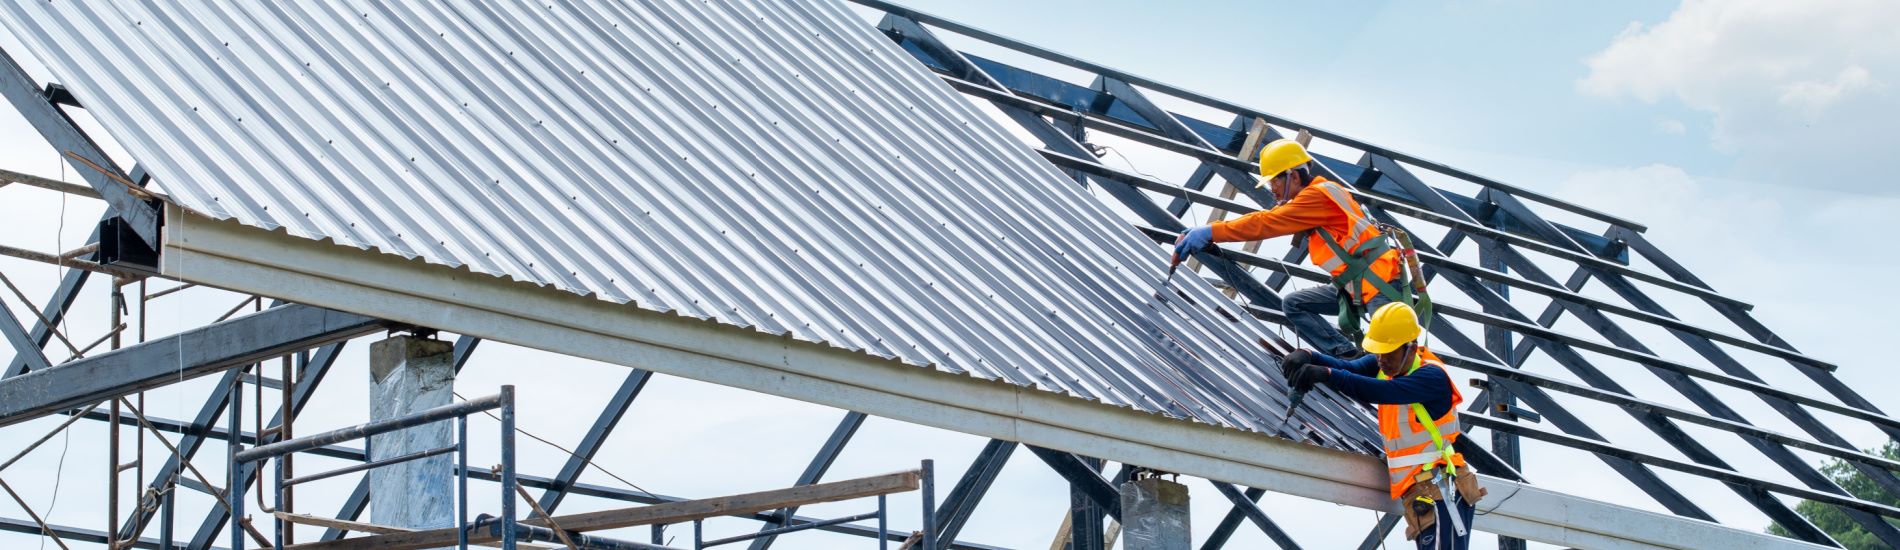 10 Reasons Why Metal Roofing Is A Must for Commercial Building